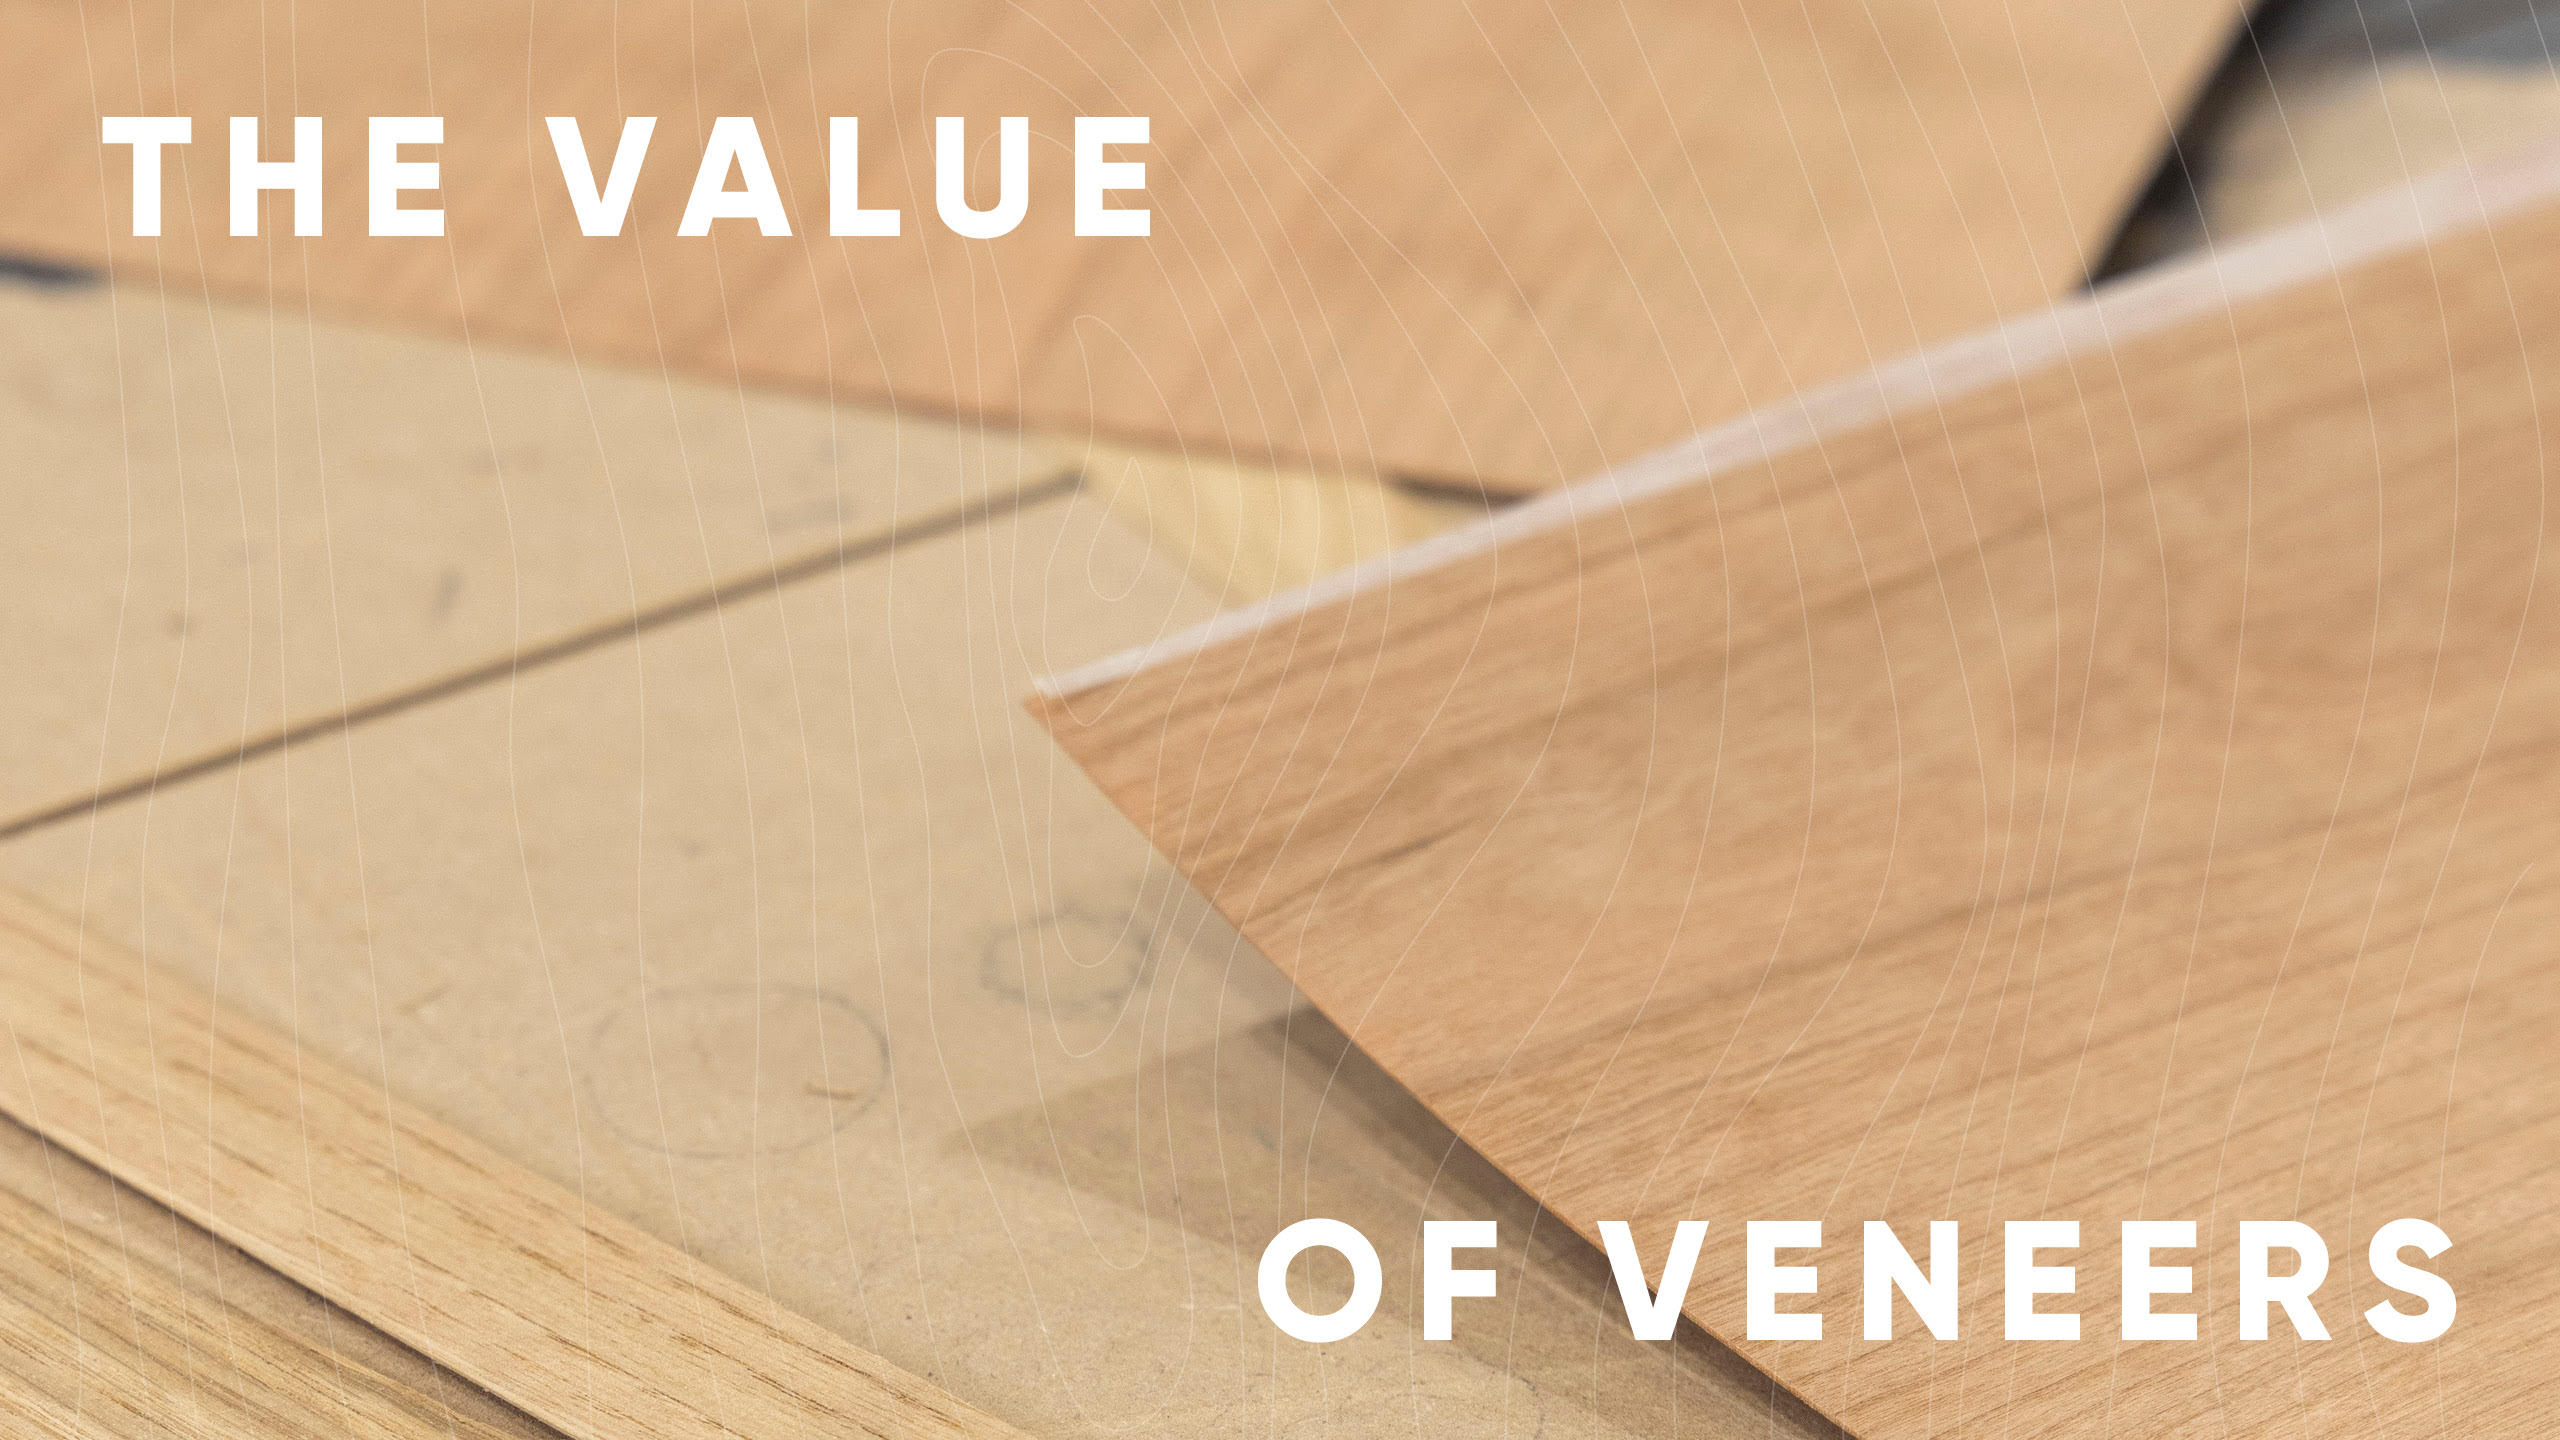 Words on Wood | The Value of Veneers with Cathy Danzer, Rio Kobayashi 